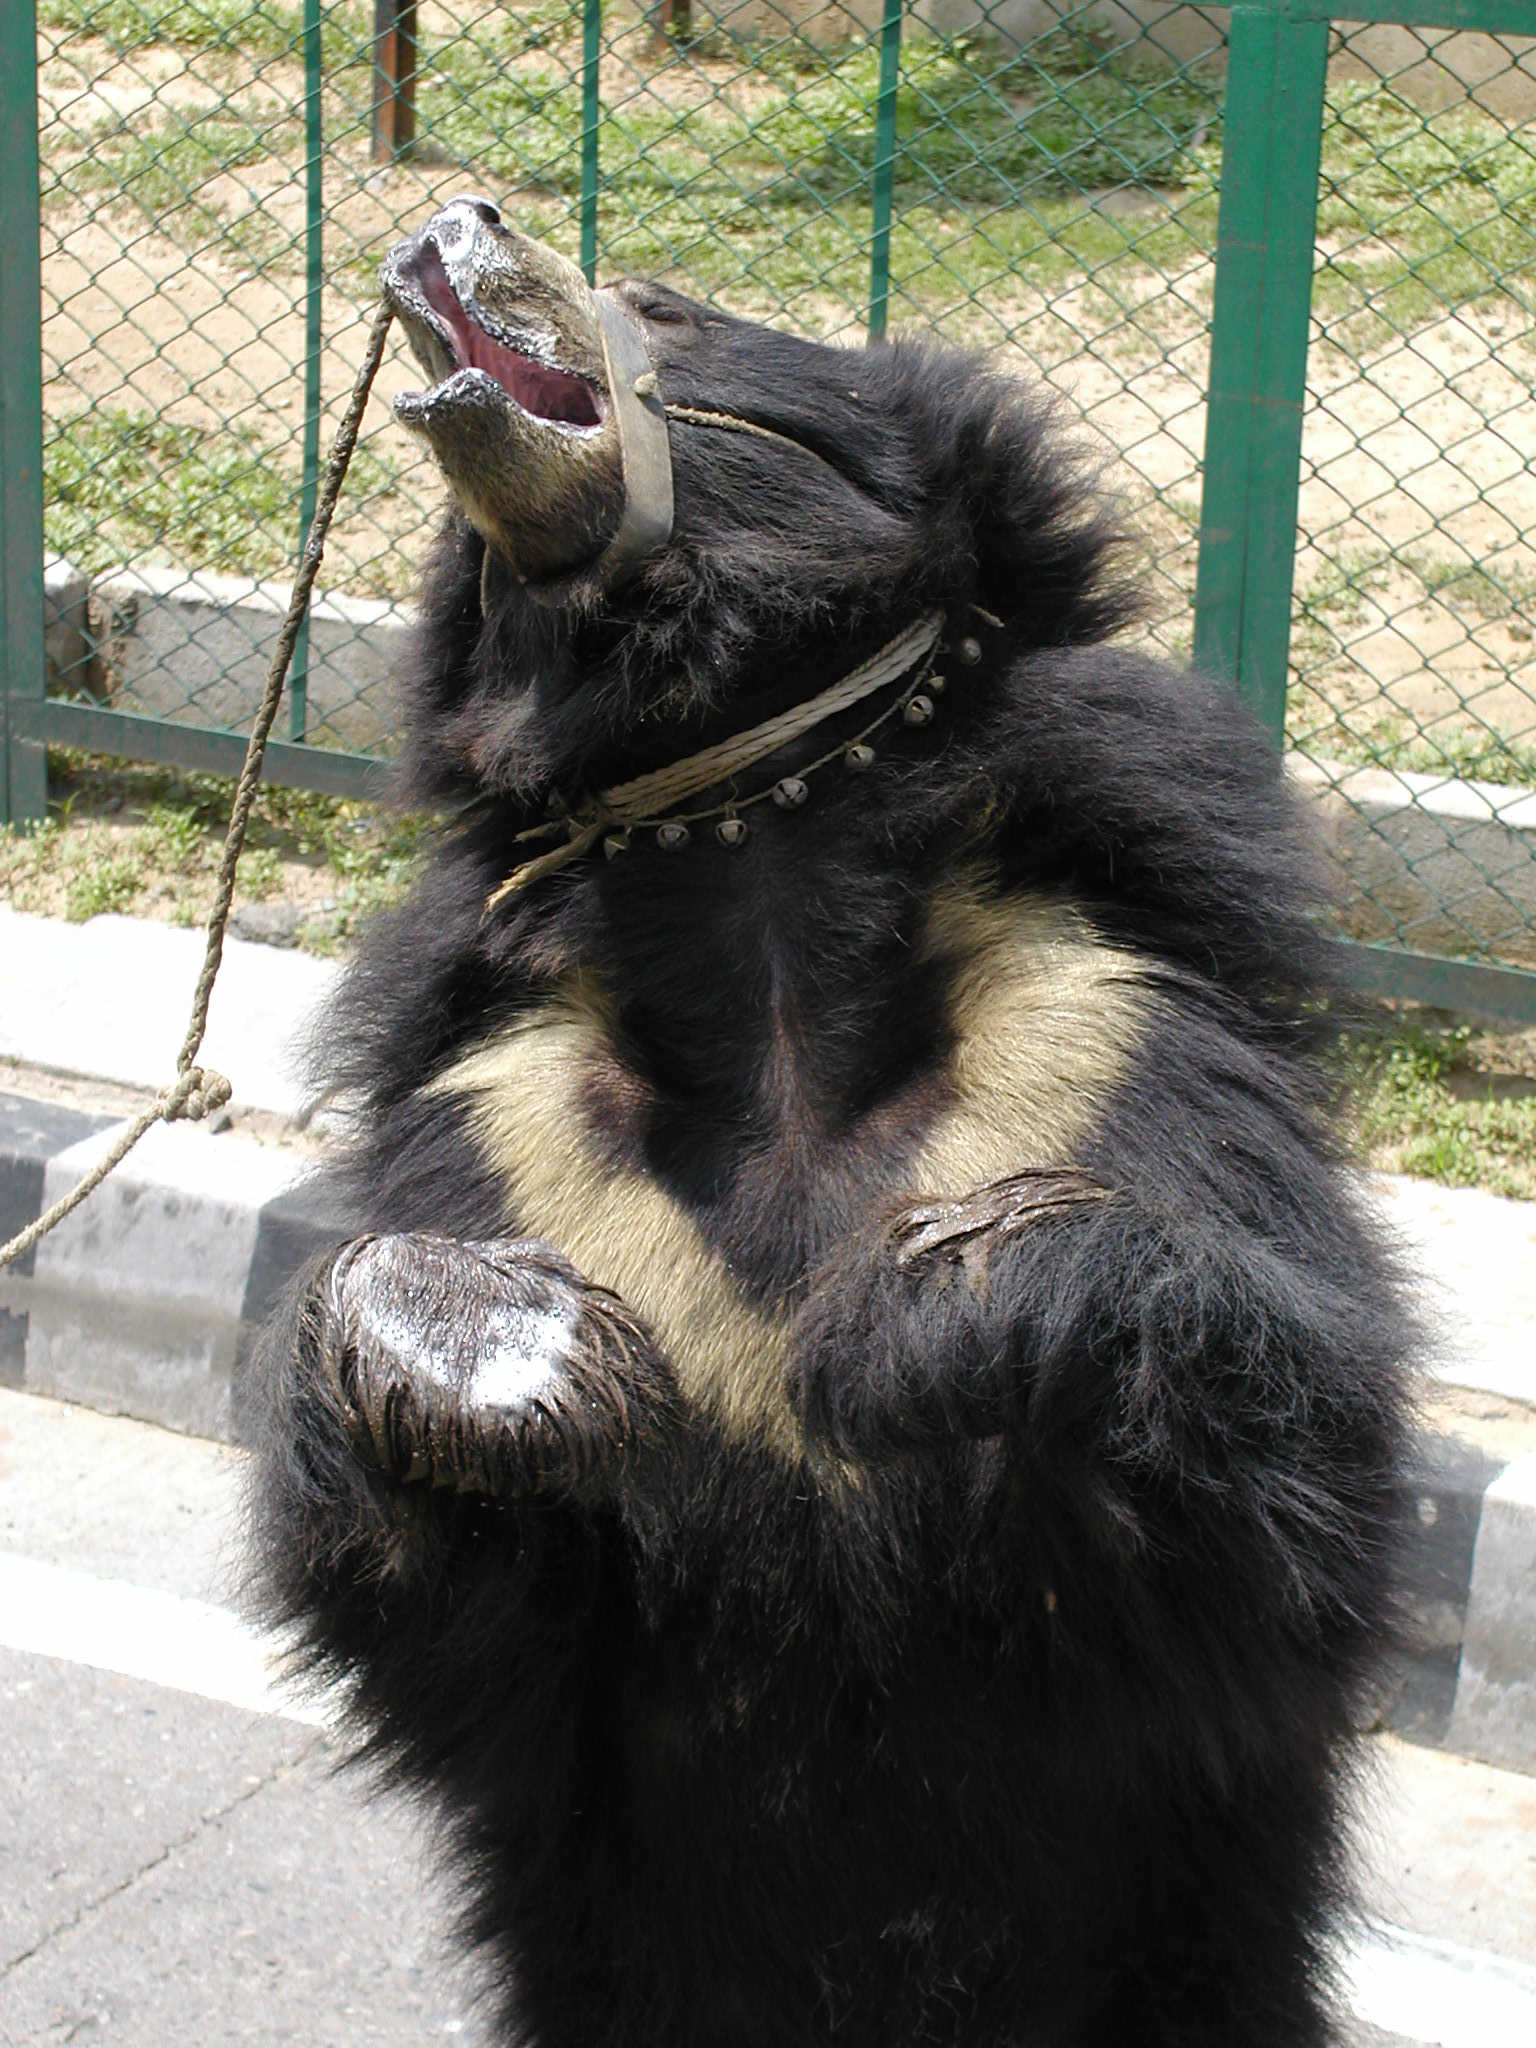 A bear dancing on the street for entertainment 